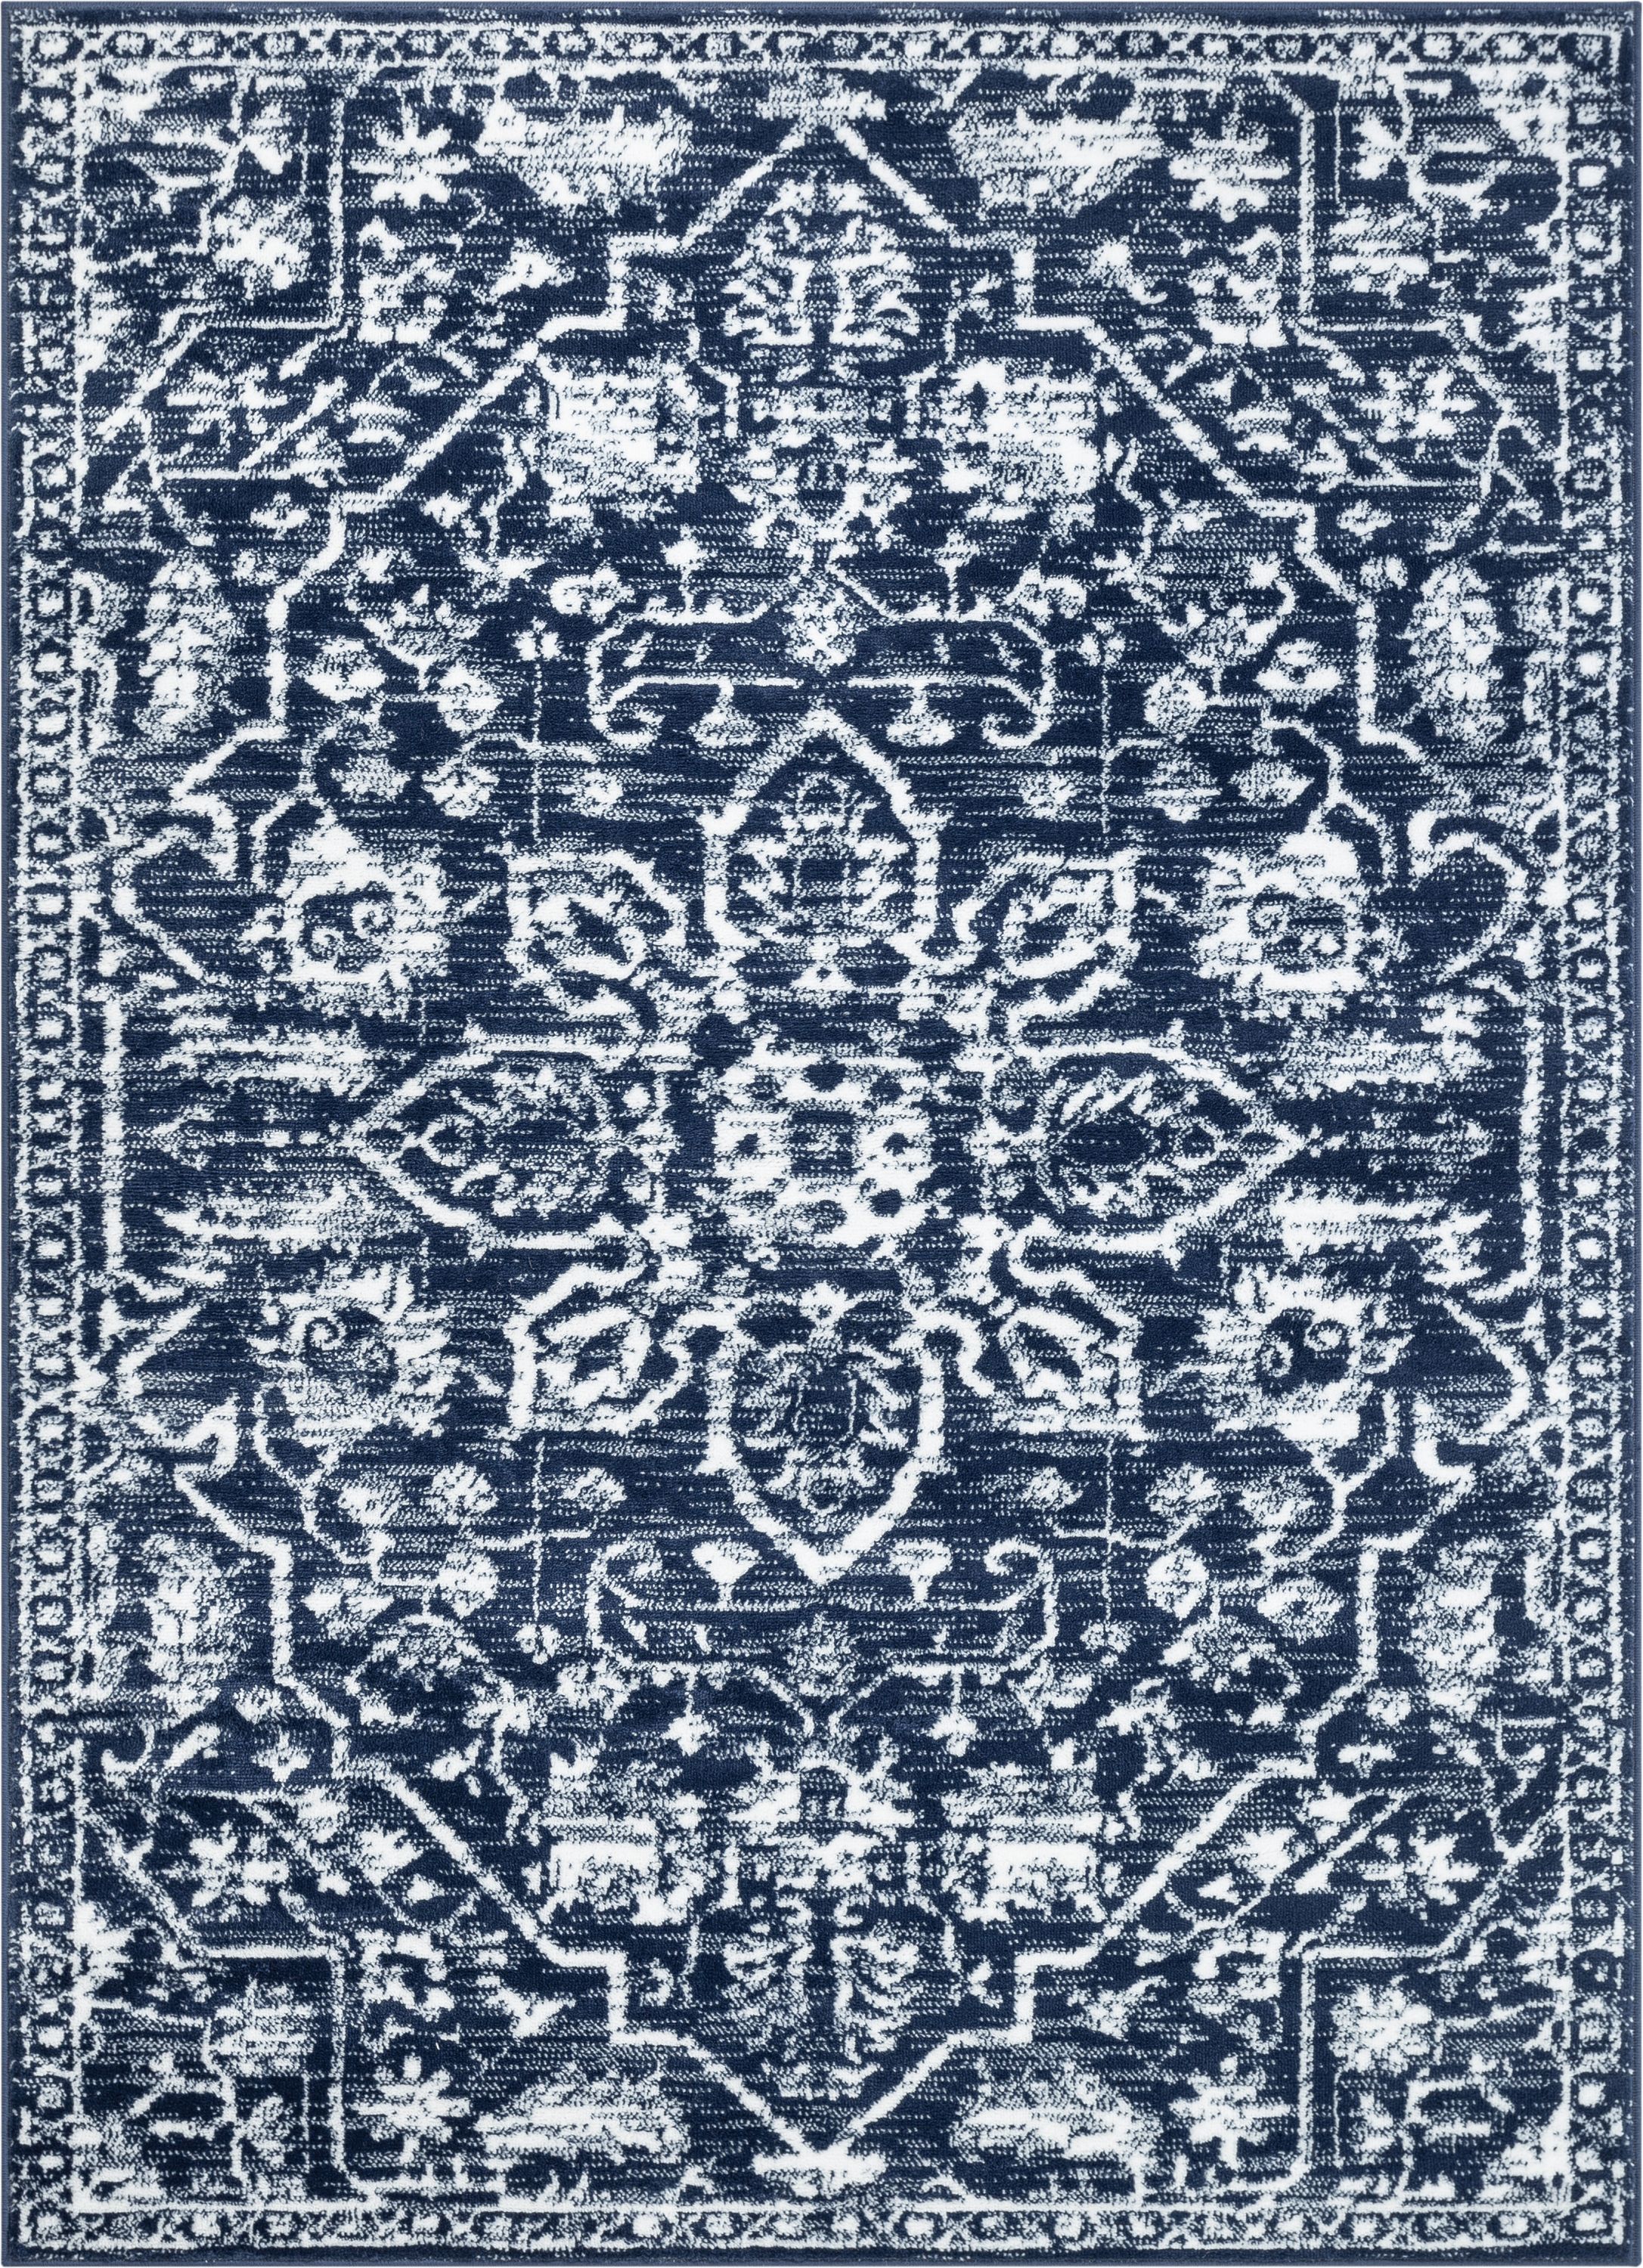 Well Woven Dazzle Disa Vintage Bohemian Oriental Floral Dark Blue 5'3" x 7'3" Area Rug - image 2 of 9